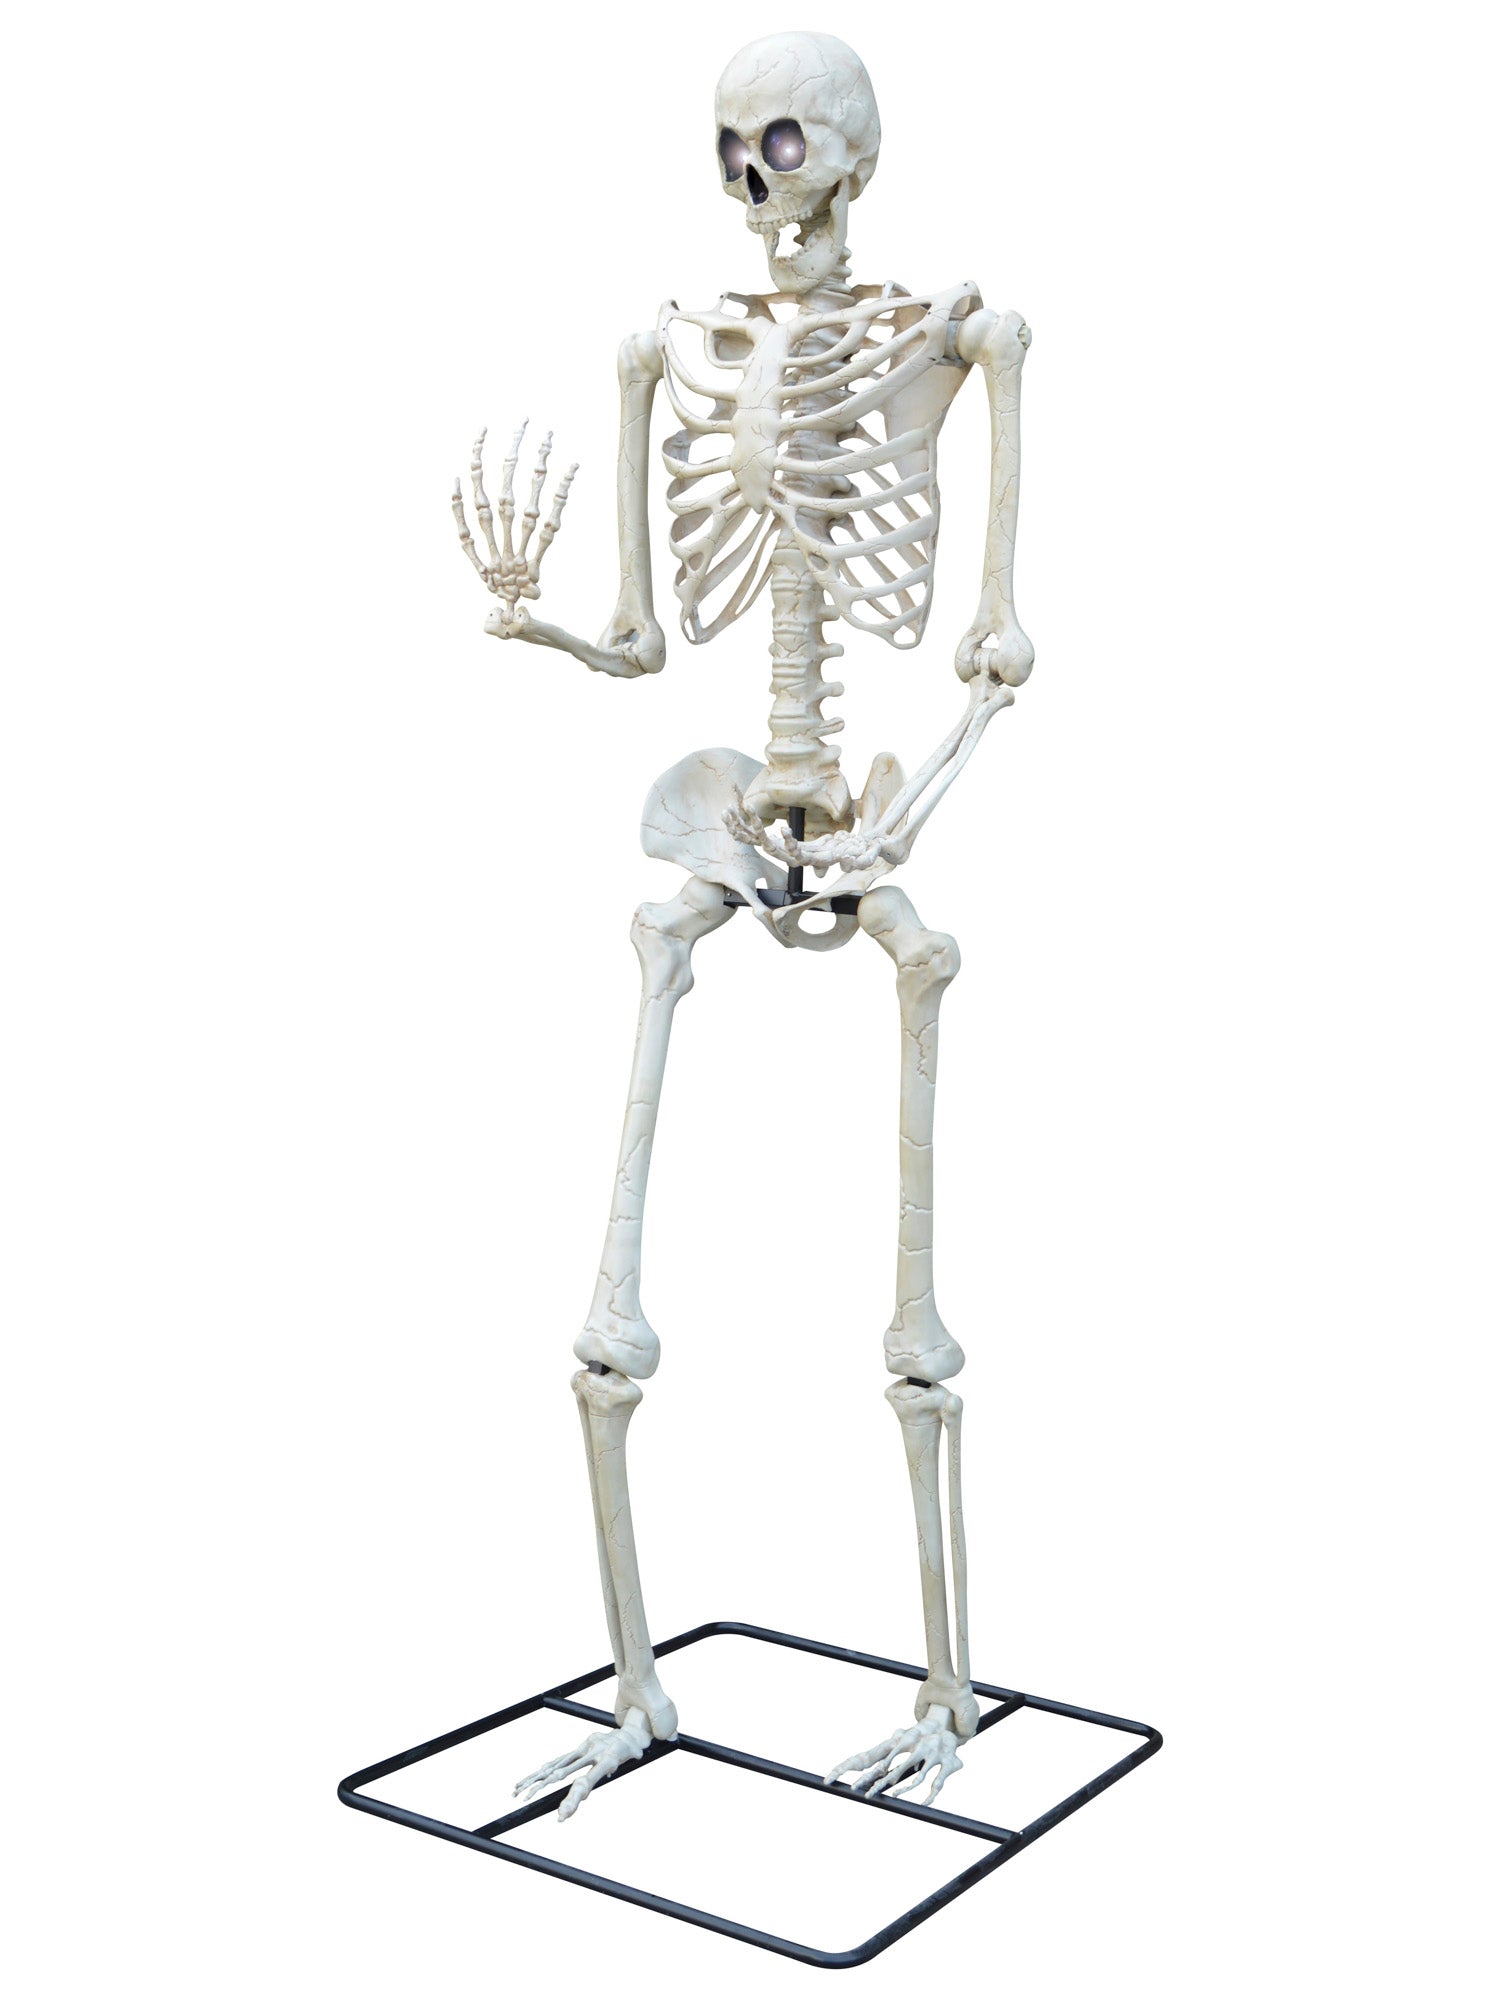 10 Foot Light Up Colossal Skeleton Standing Prop - costumes.com